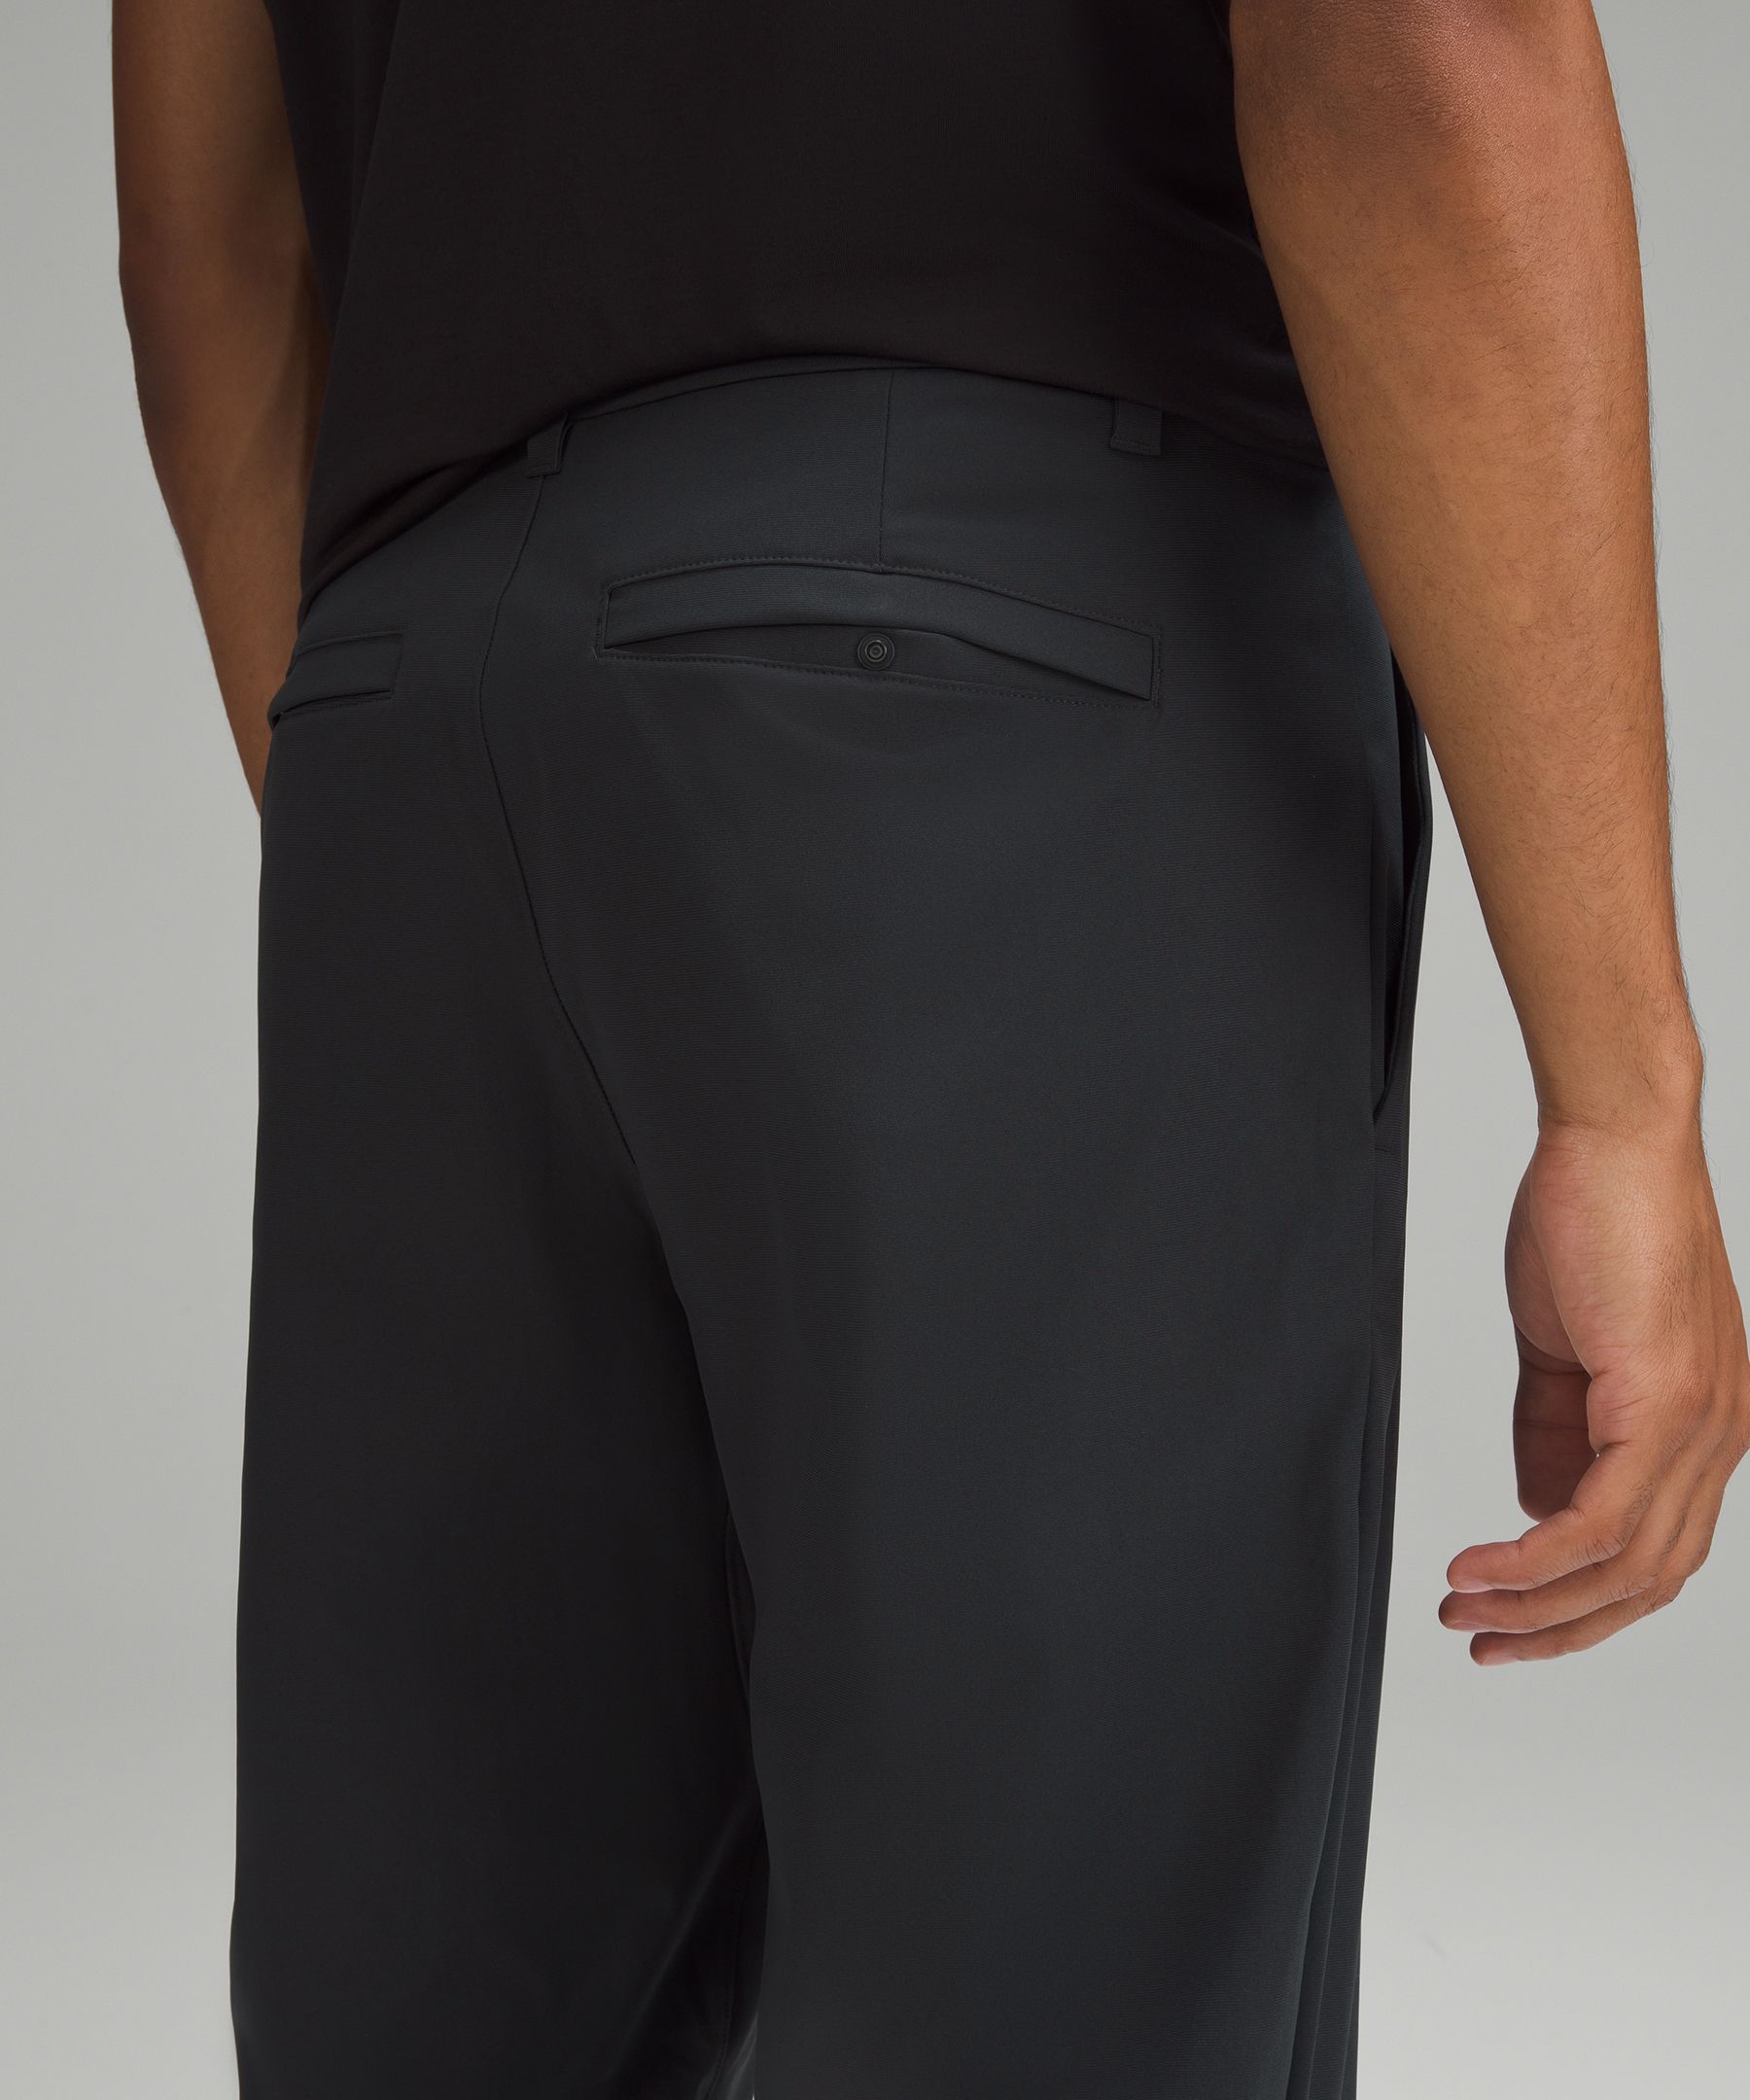 Lululemon ABC Relaxed-Fit Trouser 32" *Warpstreme. 5